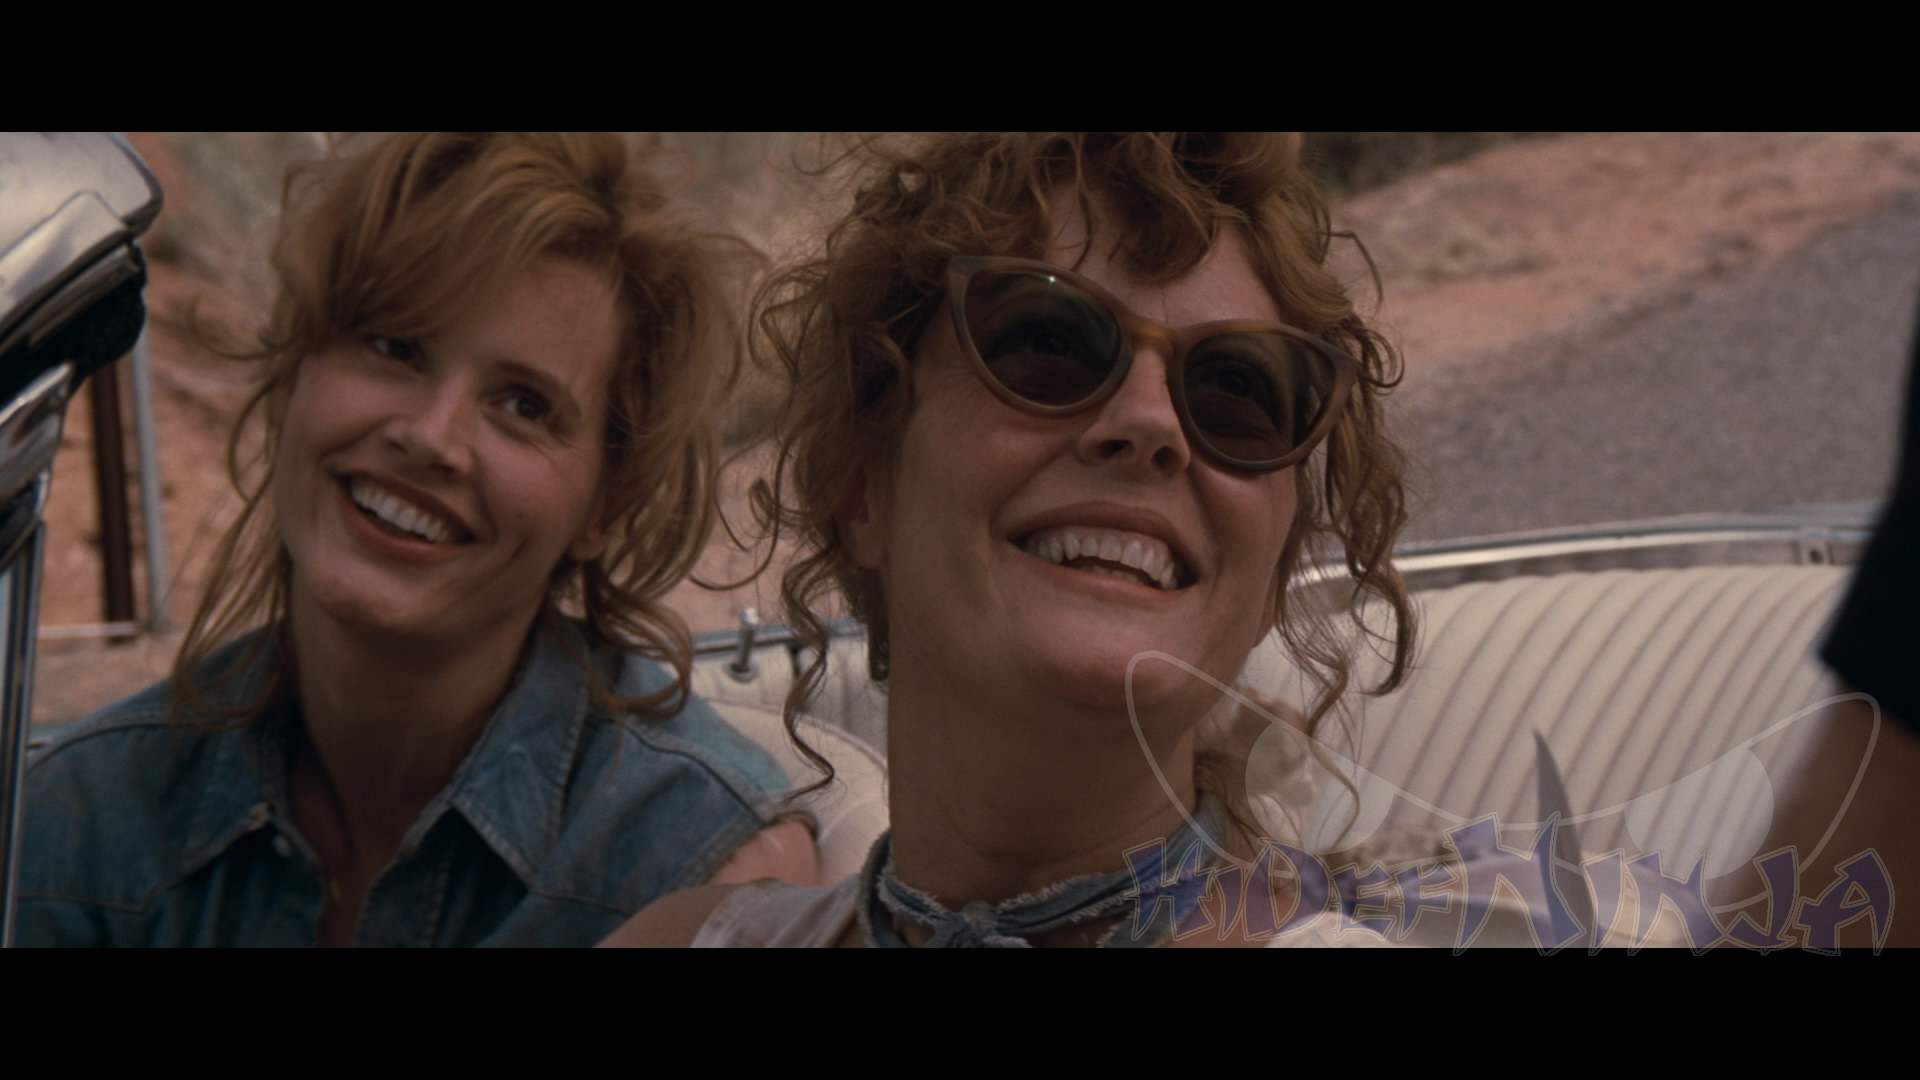 Thelma and Louise' Blu-ray movie review - Washington Times